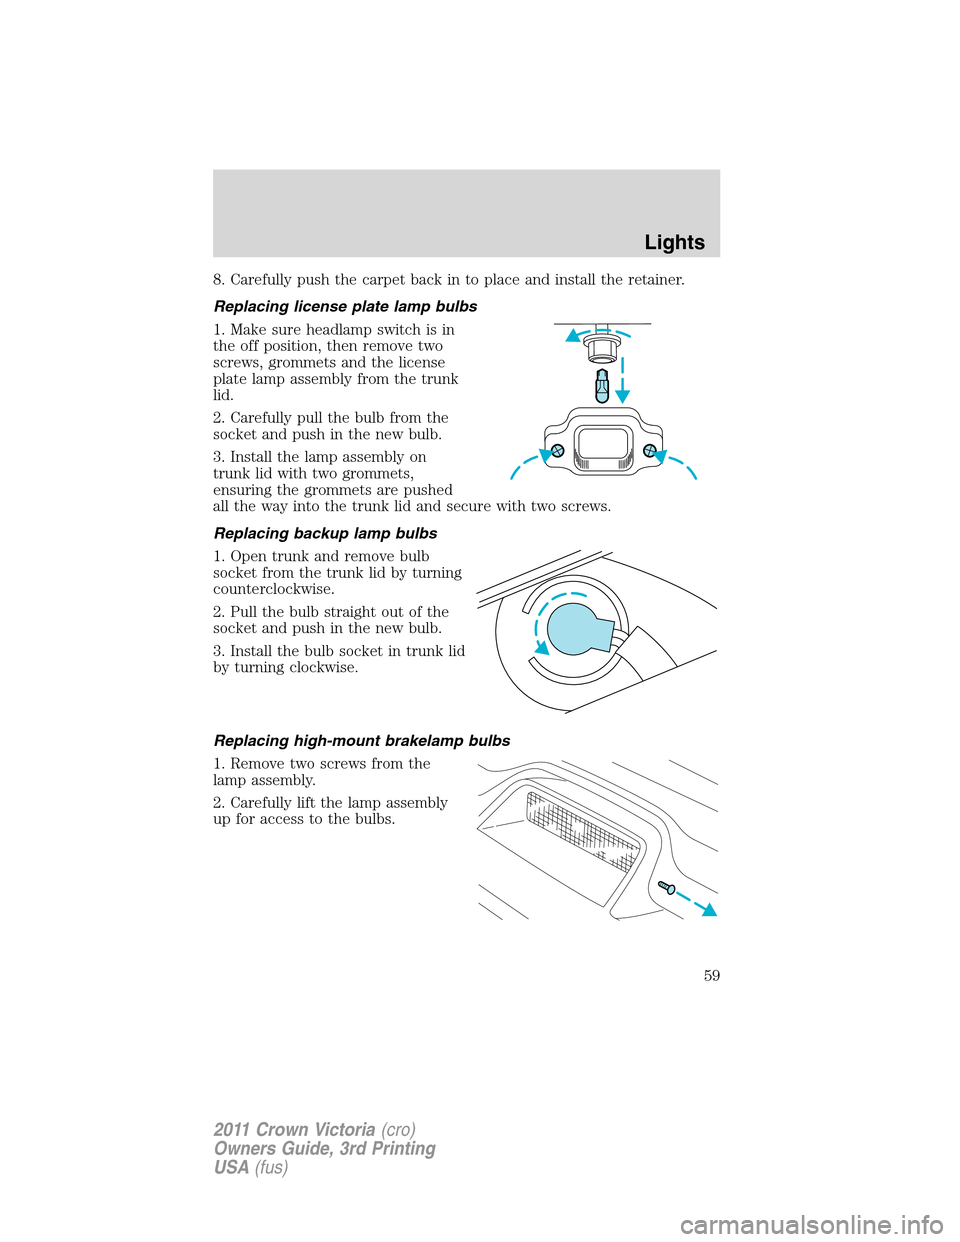 Mercury Grand Marquis 1011  Owners Manuals 8. Carefully push the carpet back in to place and install the retainer.
Replacing license plate lamp bulbs
1. Make sure headlamp switch is in
the off position, then remove two
screws, grommets and the